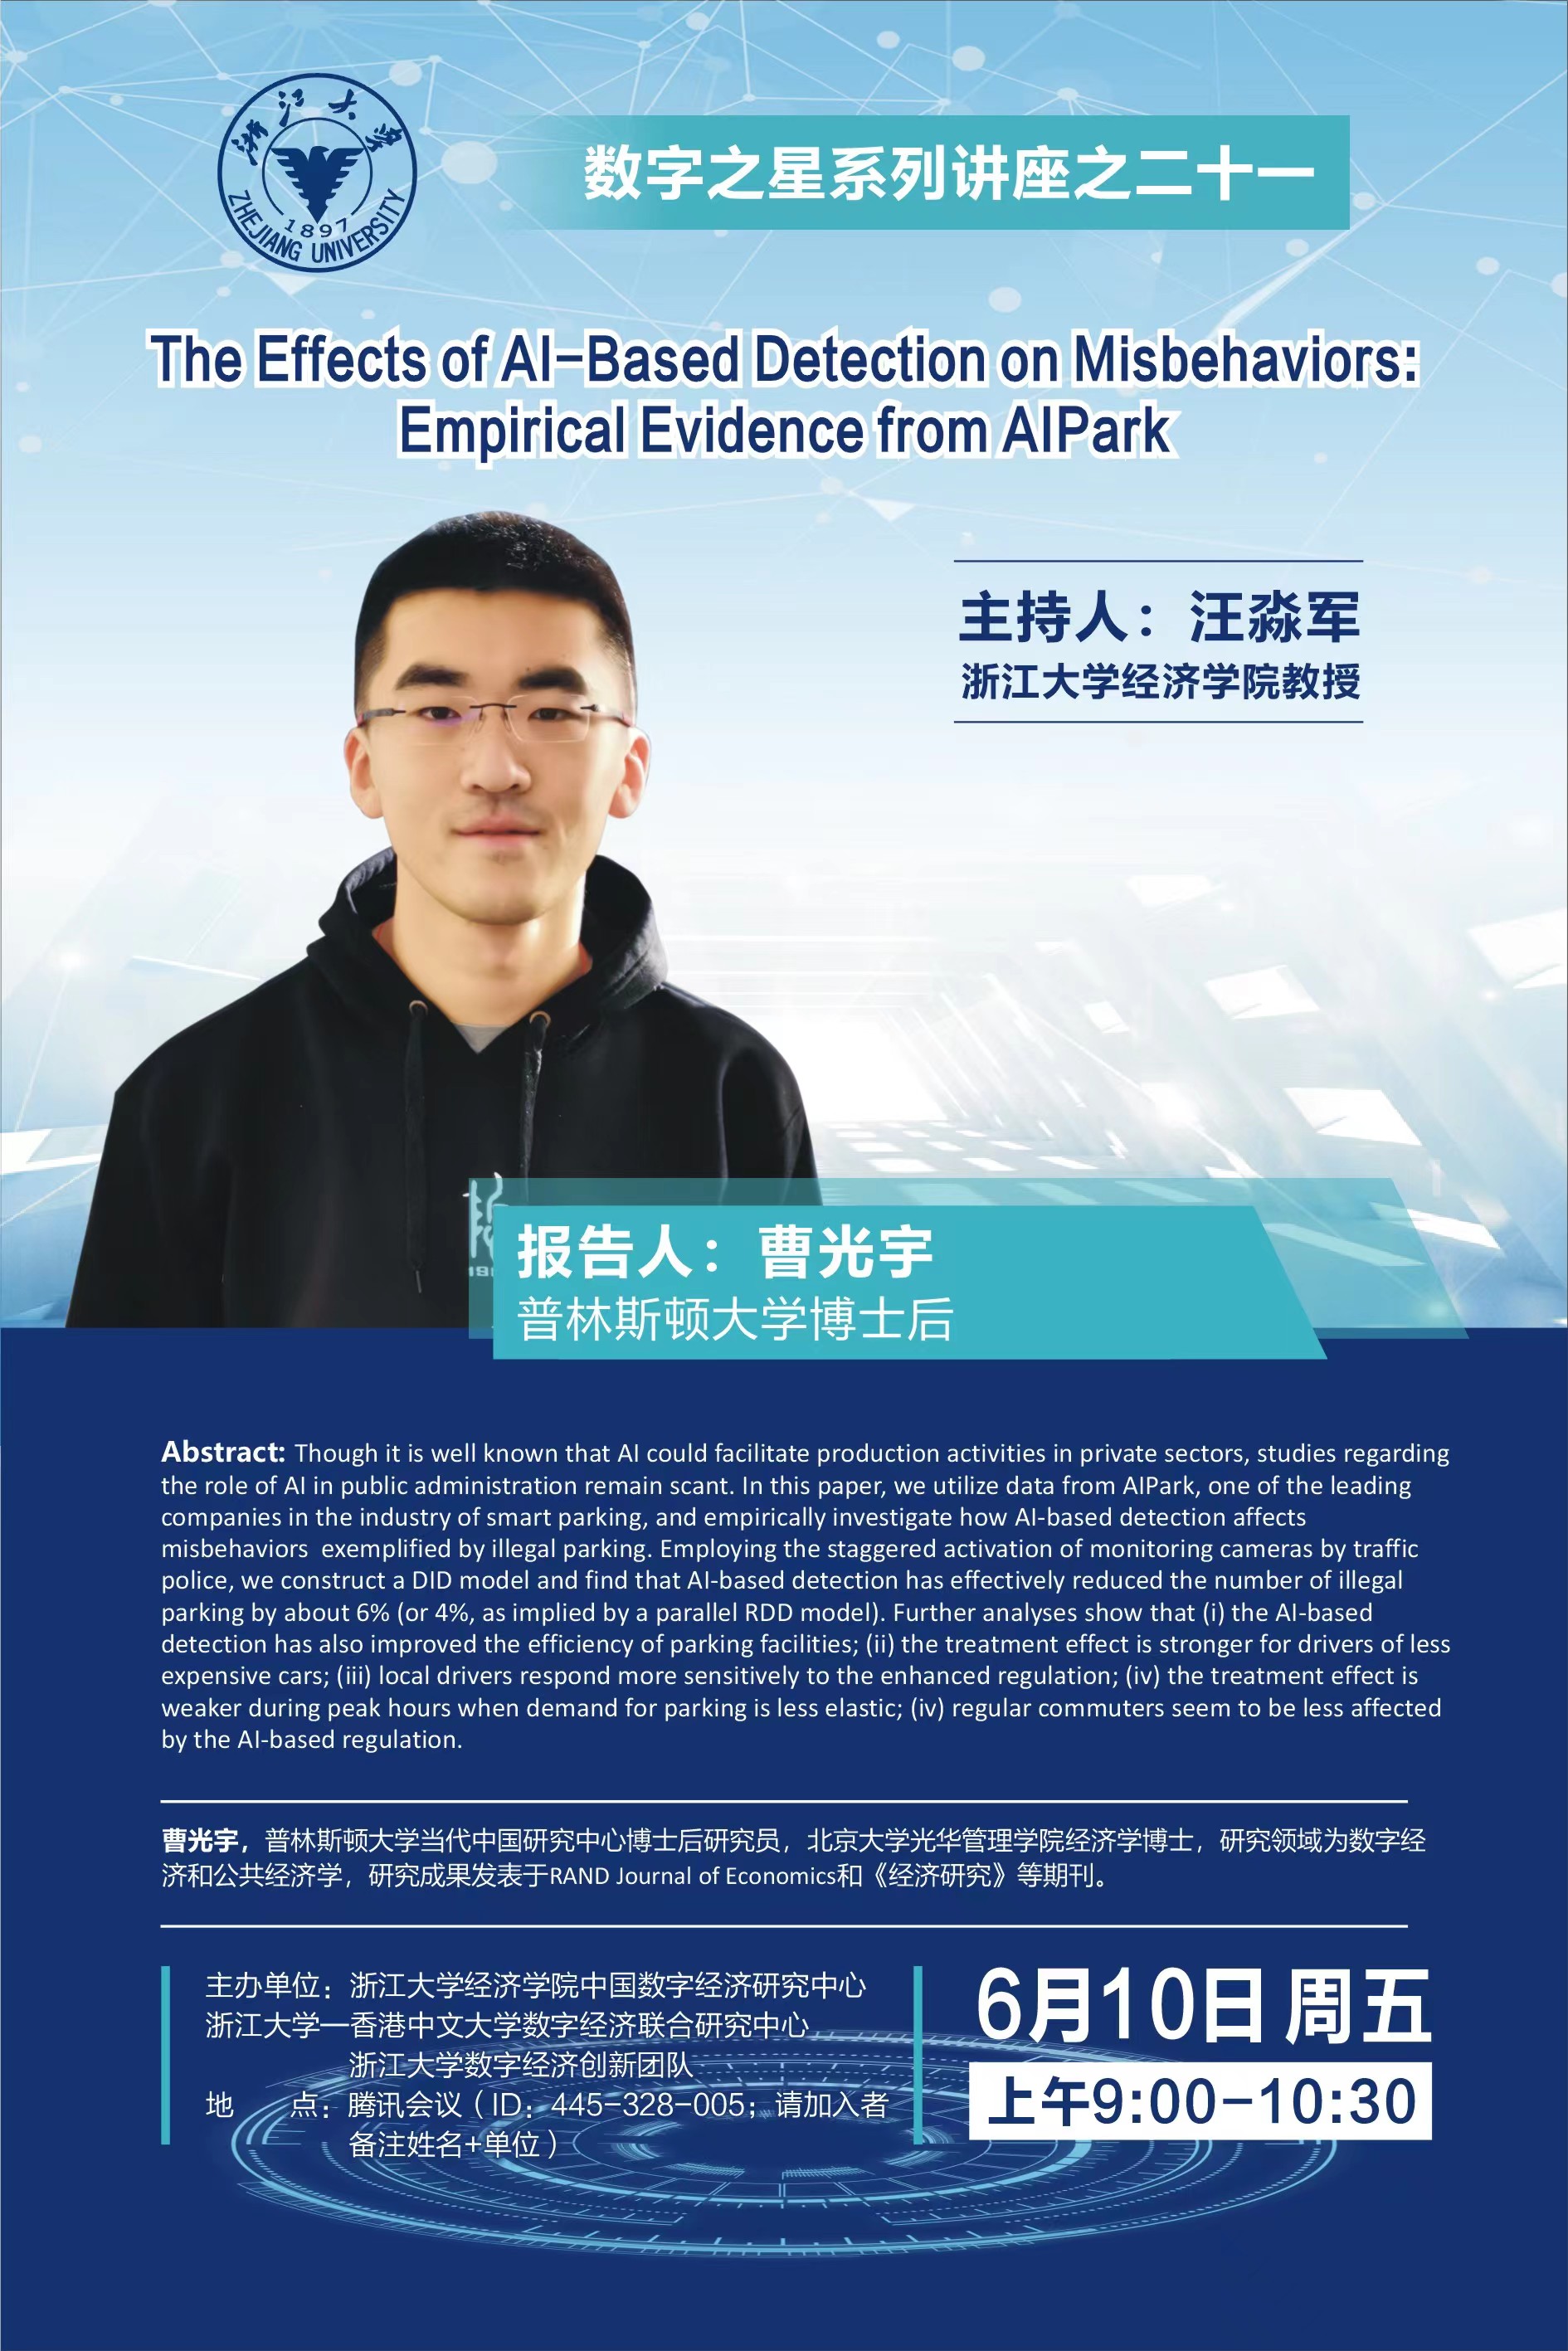 【 The Digital Star Seminar Series No.21 】The Effects of AI-Based Detection on Misbehaviors: Empirical Evidence from AIPark